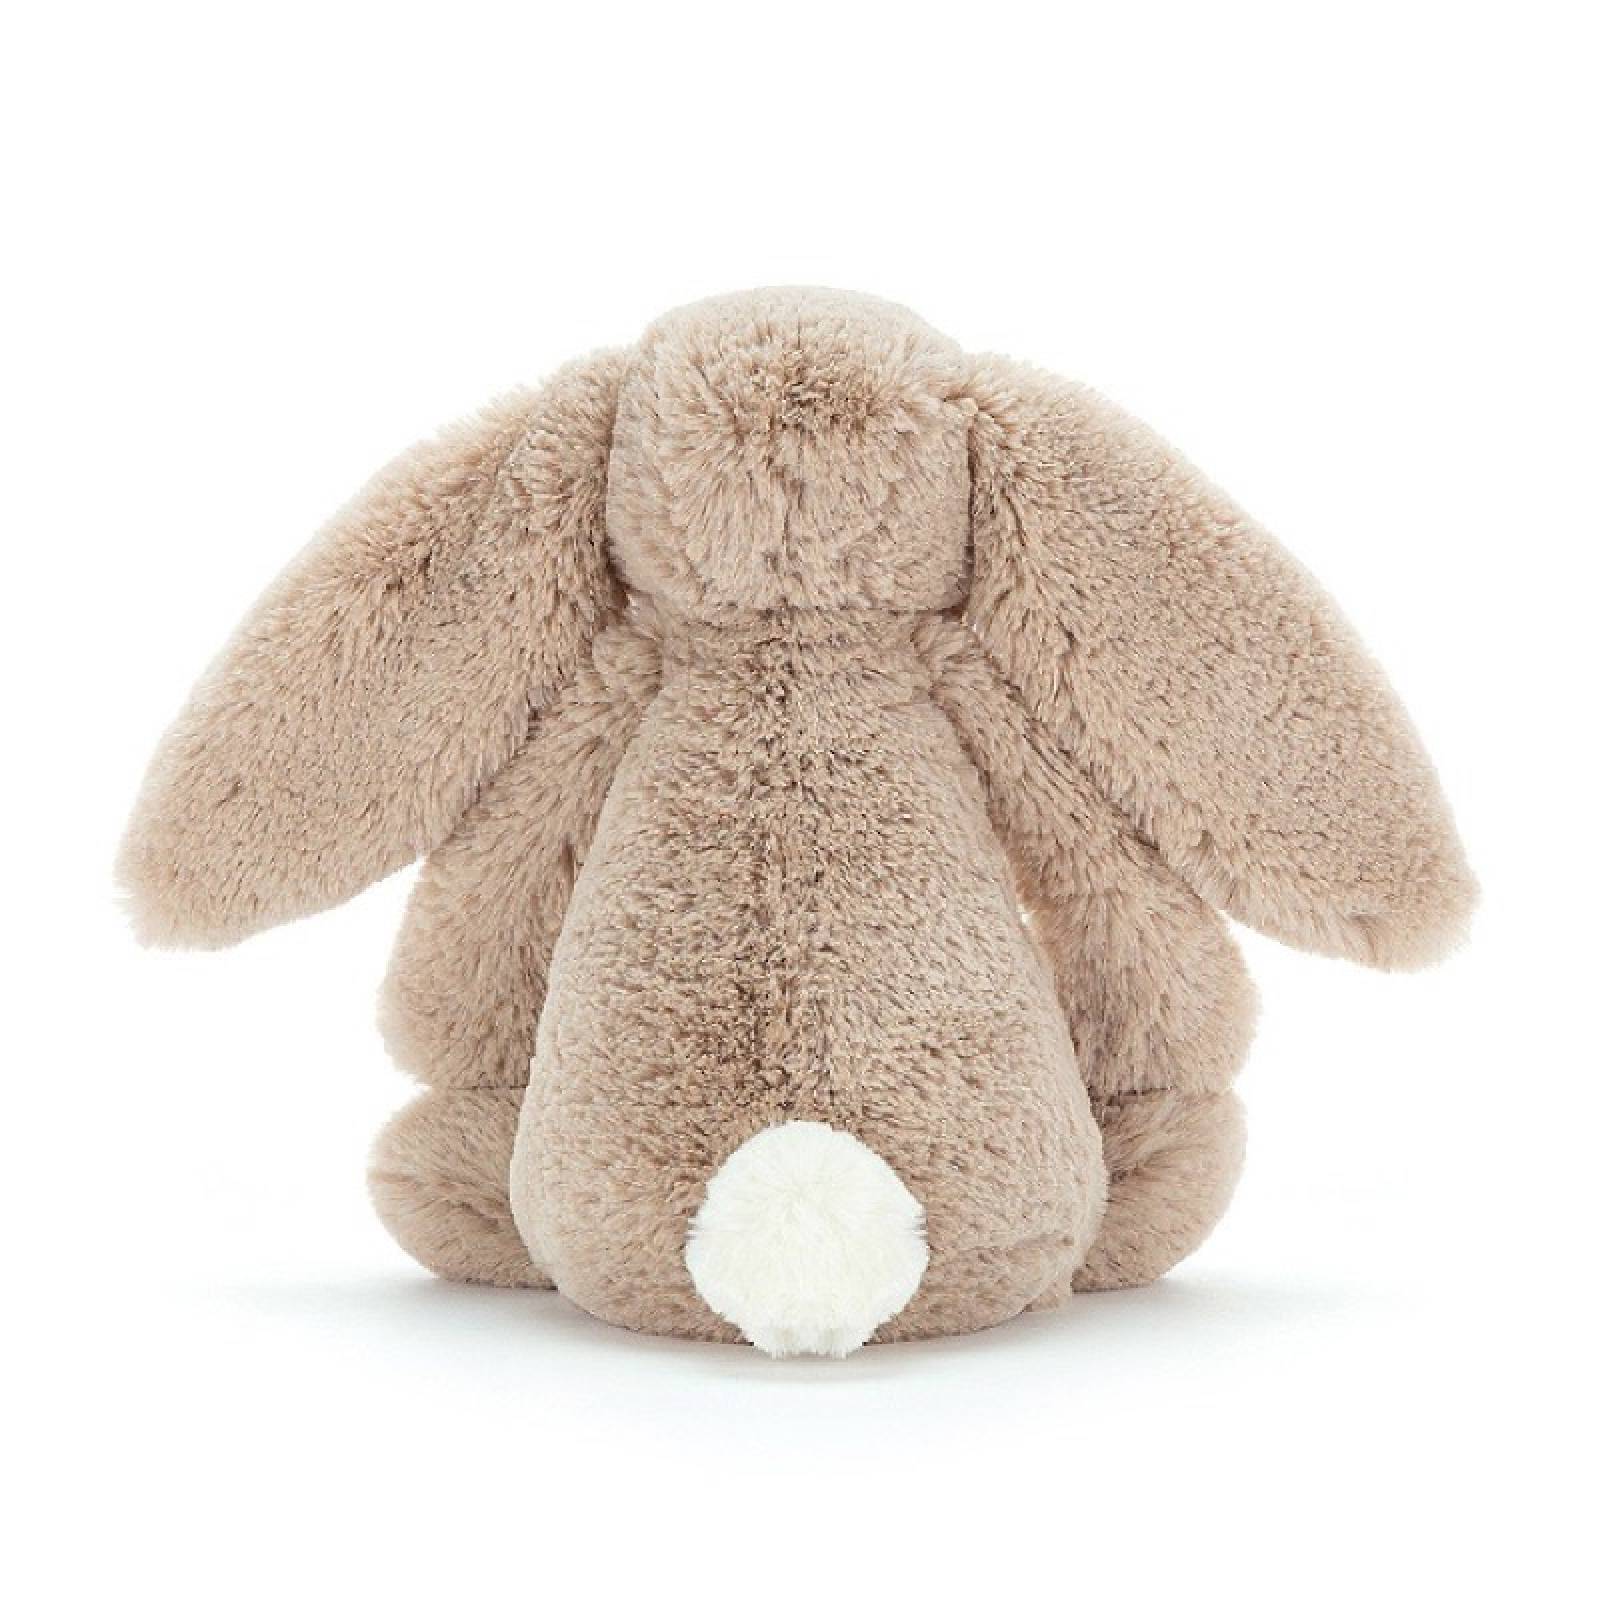 Huge Bashful Bunny In Beige Soft Toy By Jellycat thumbnails